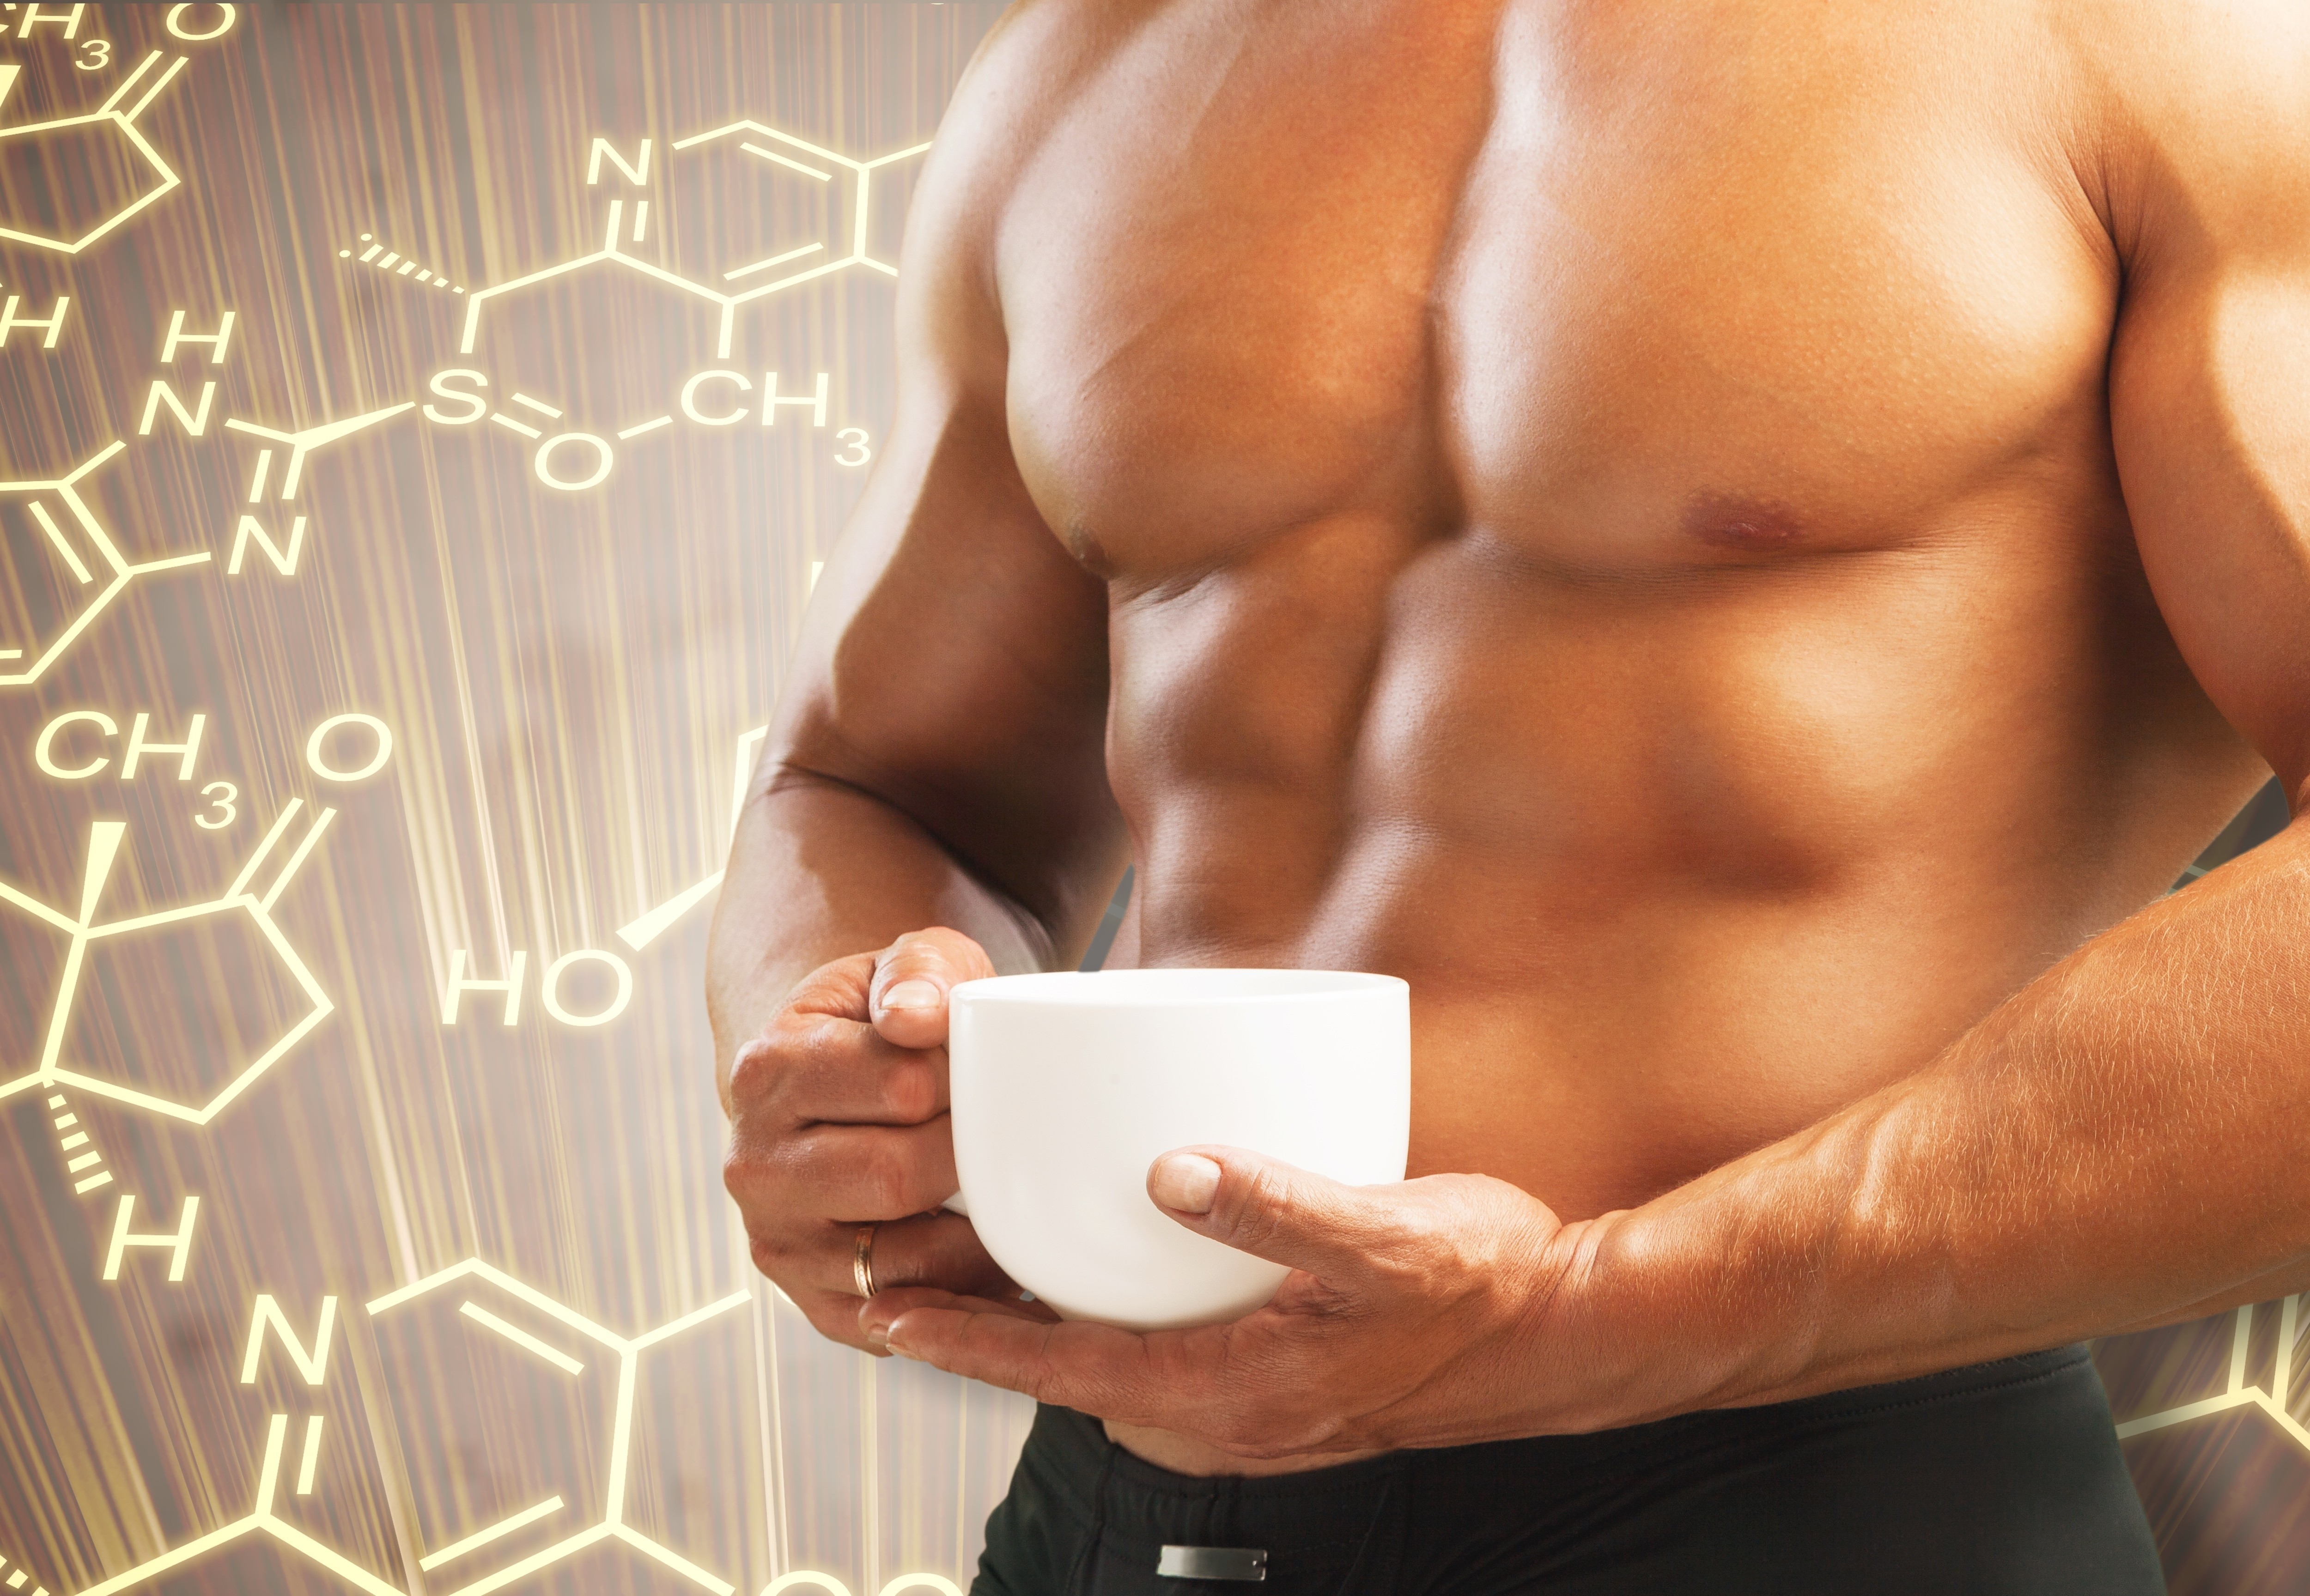 What you need to know about testosterone